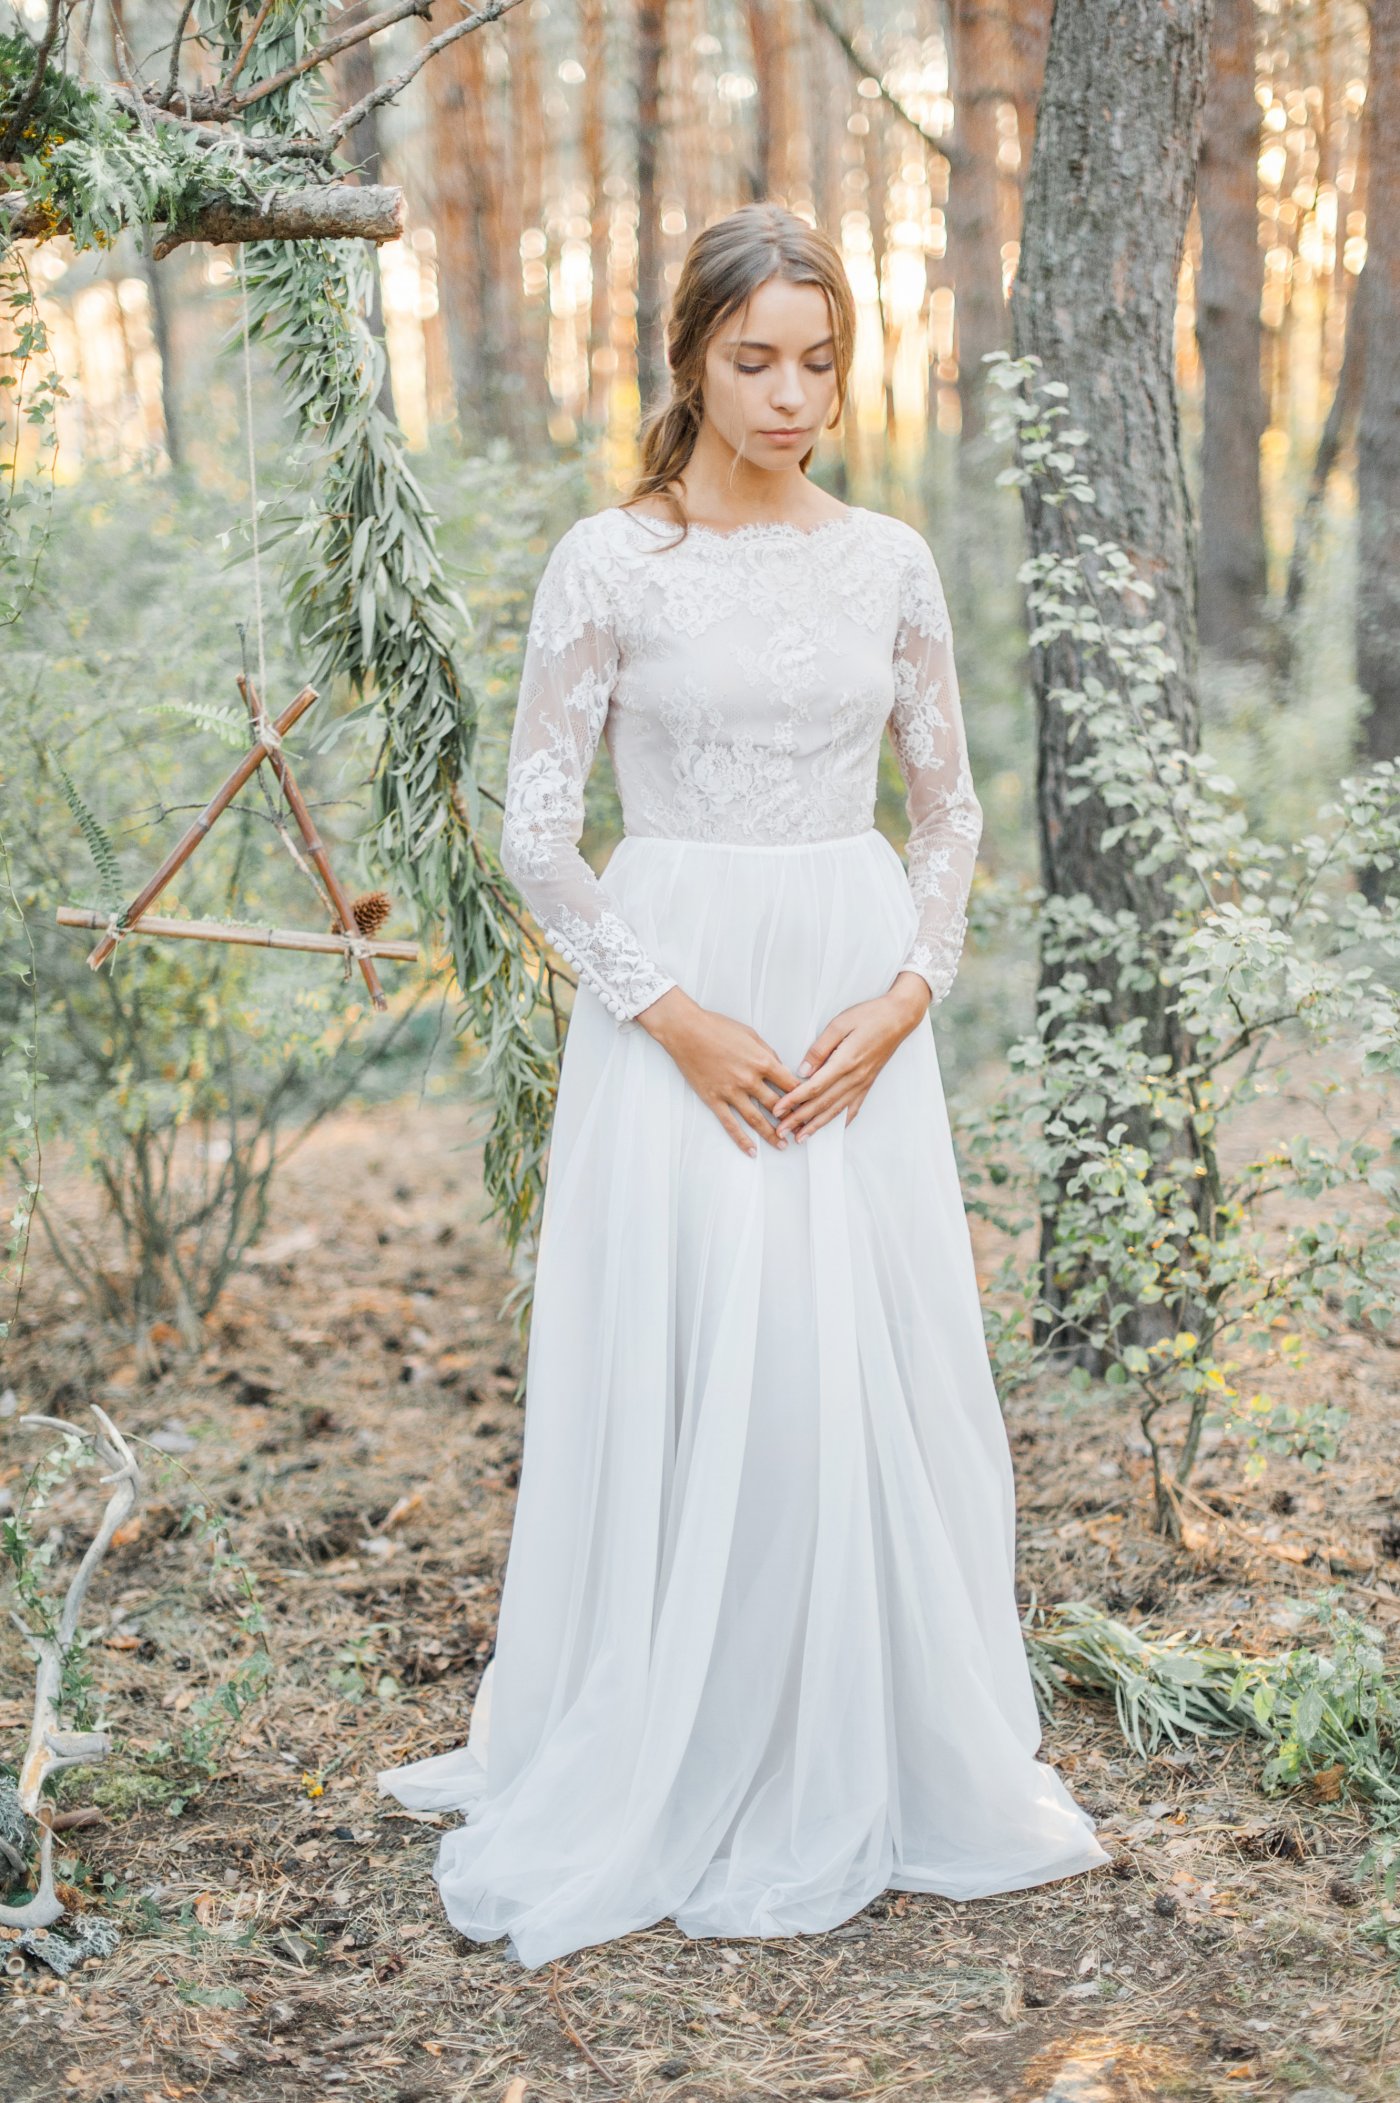 Wedding dress with high-neck bodice and sheer lace sleeve ...